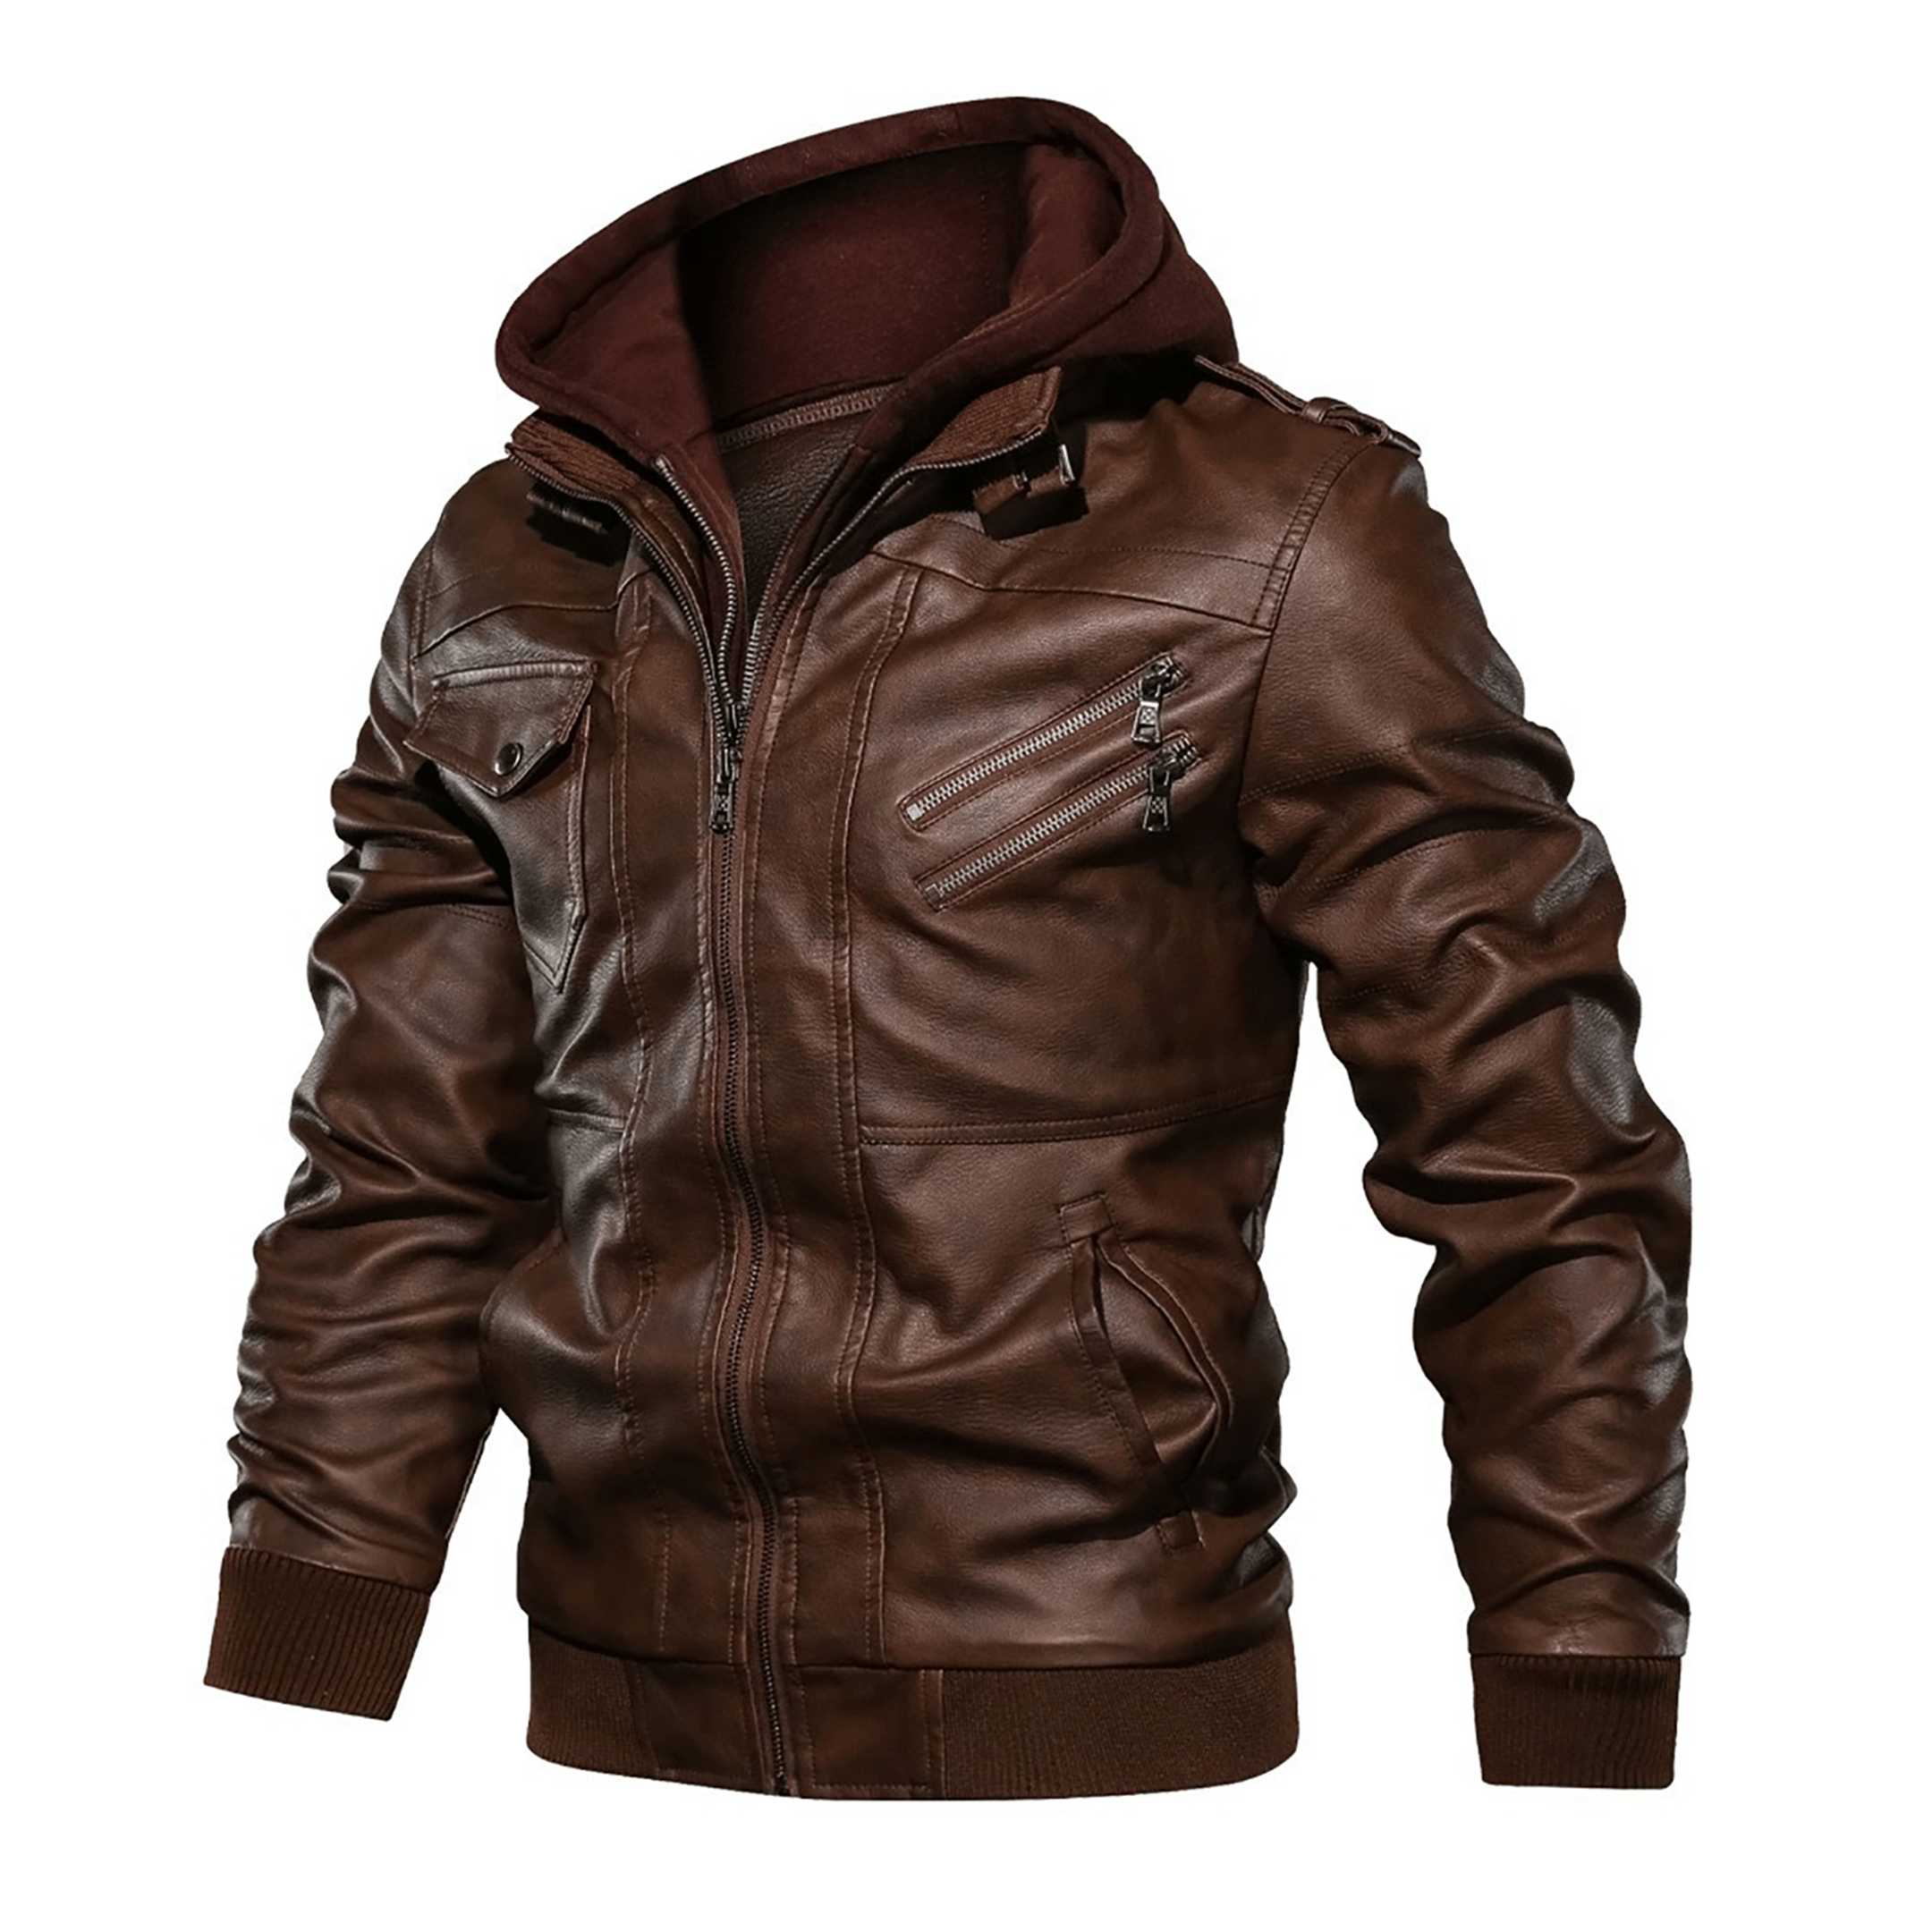 Top leather jackets and latest products 469